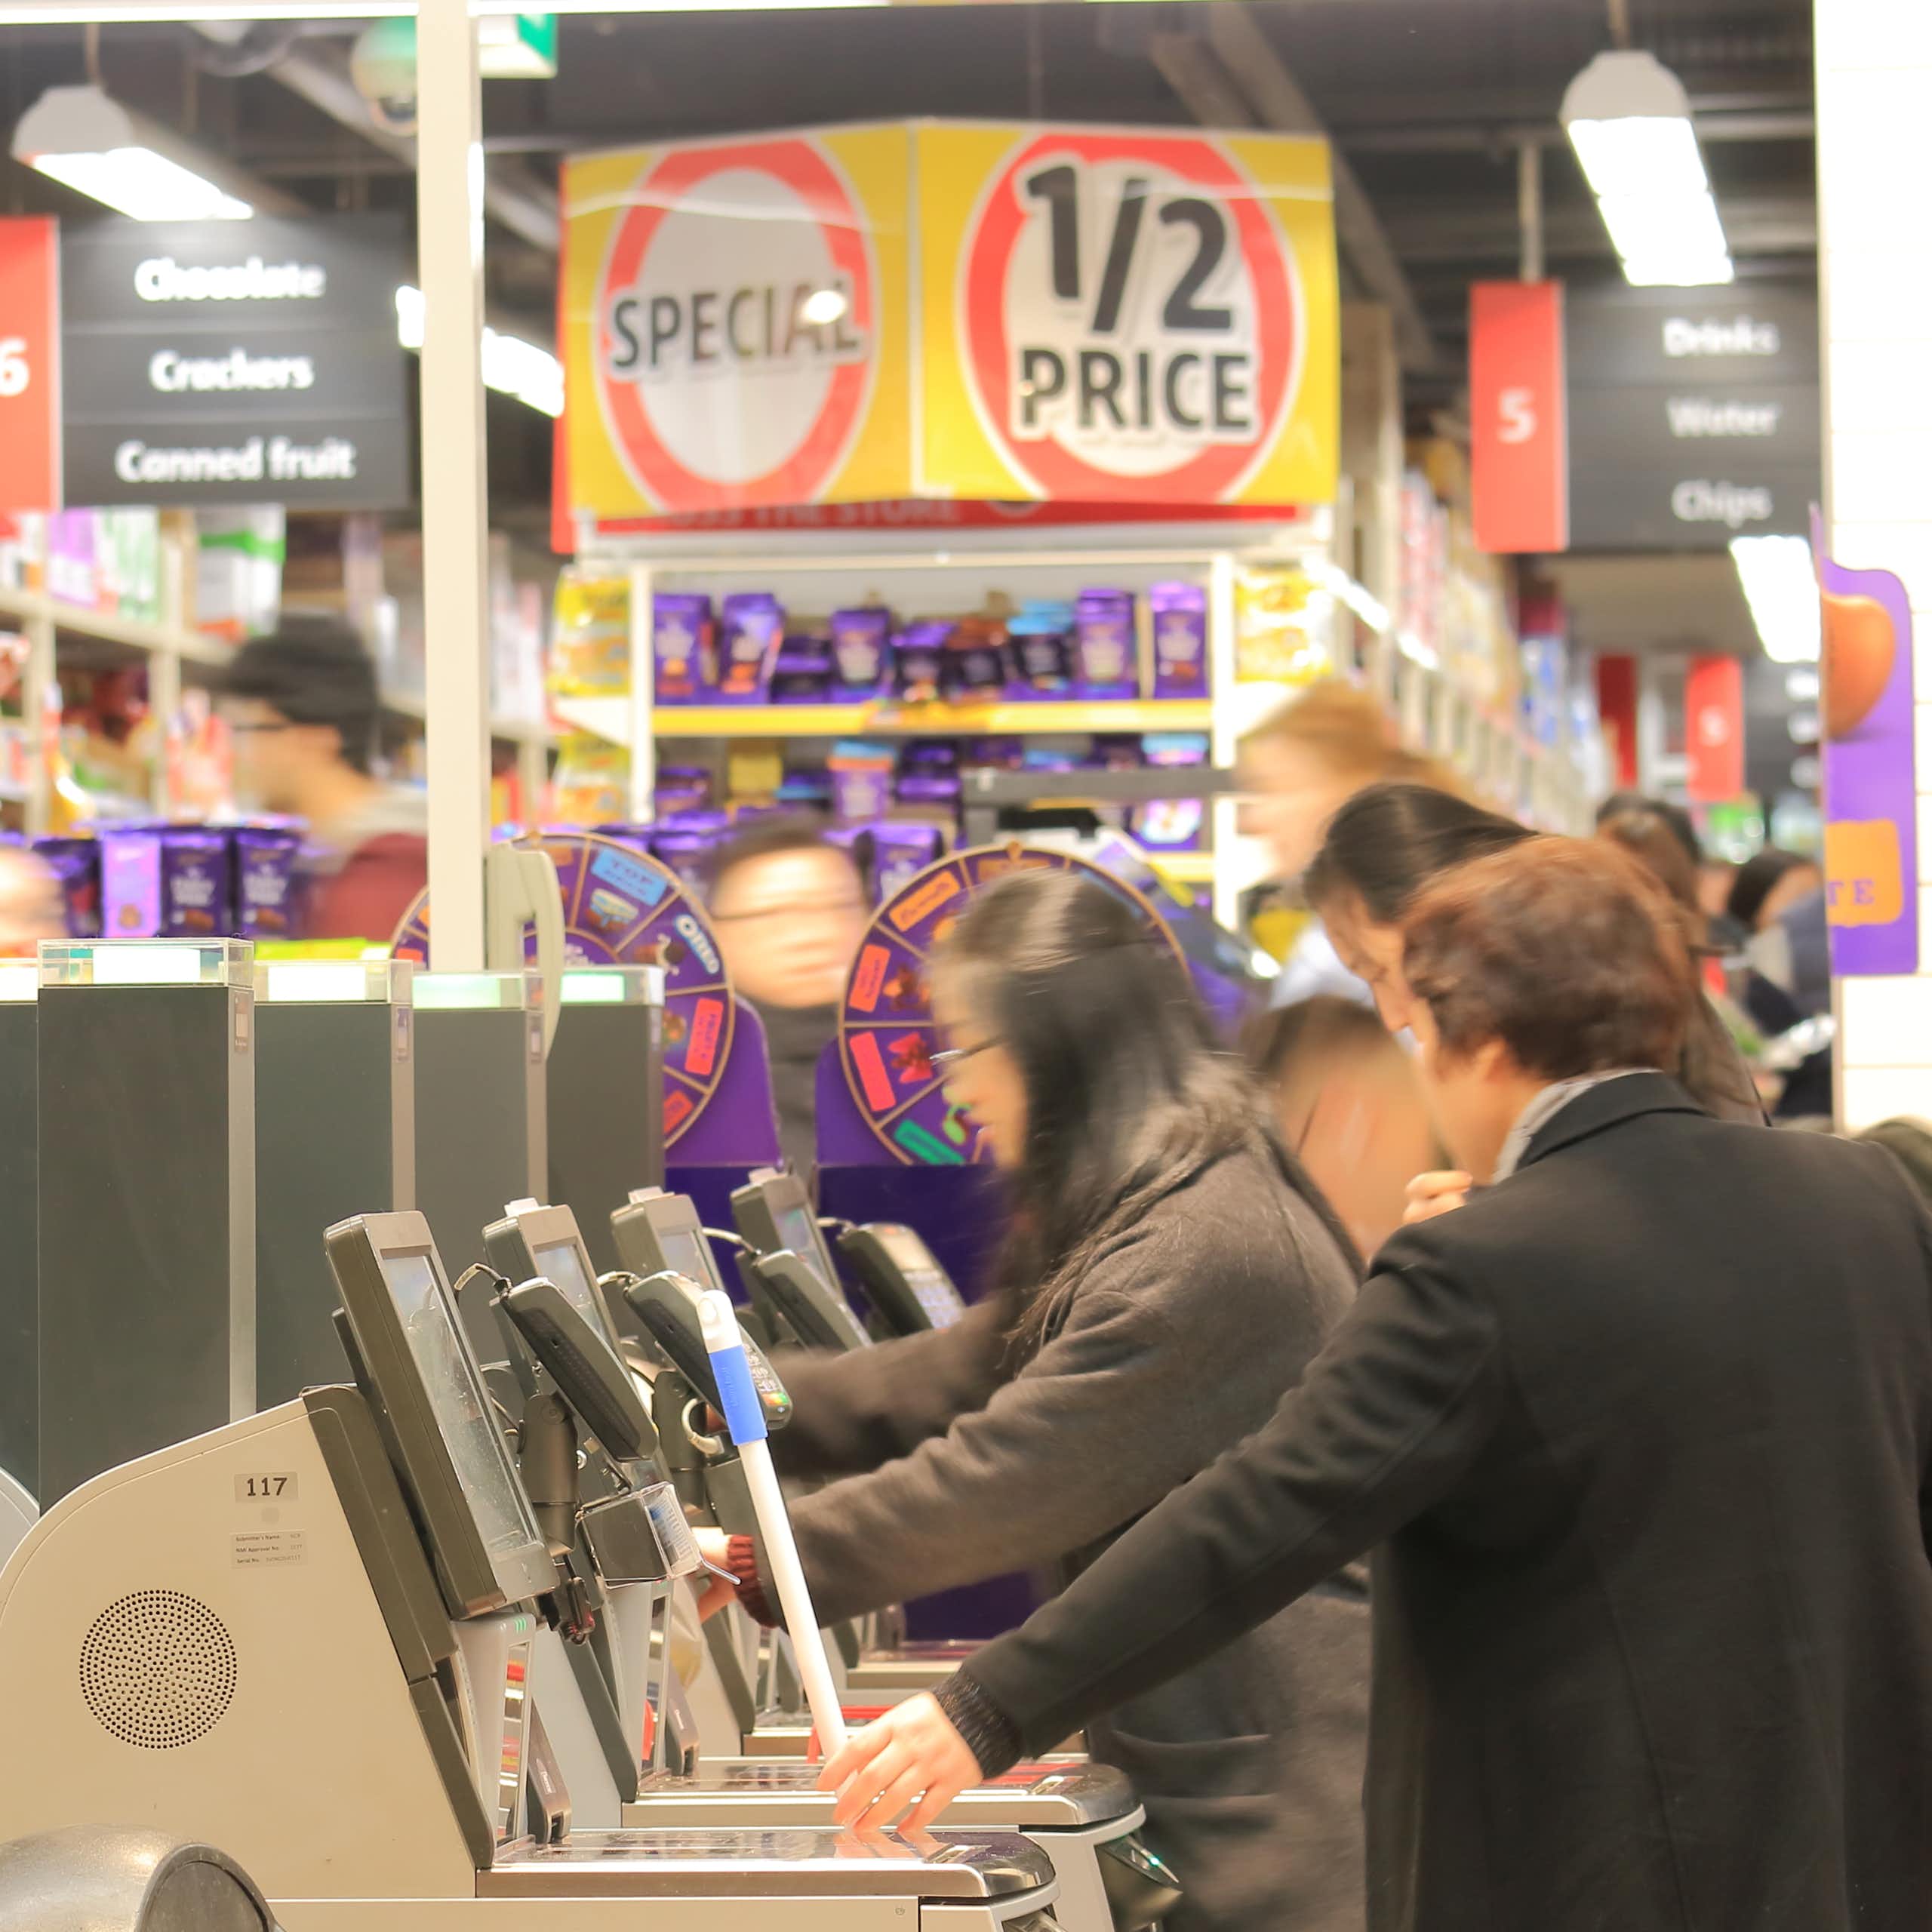 Unidentified people use self check out at a supermarket.